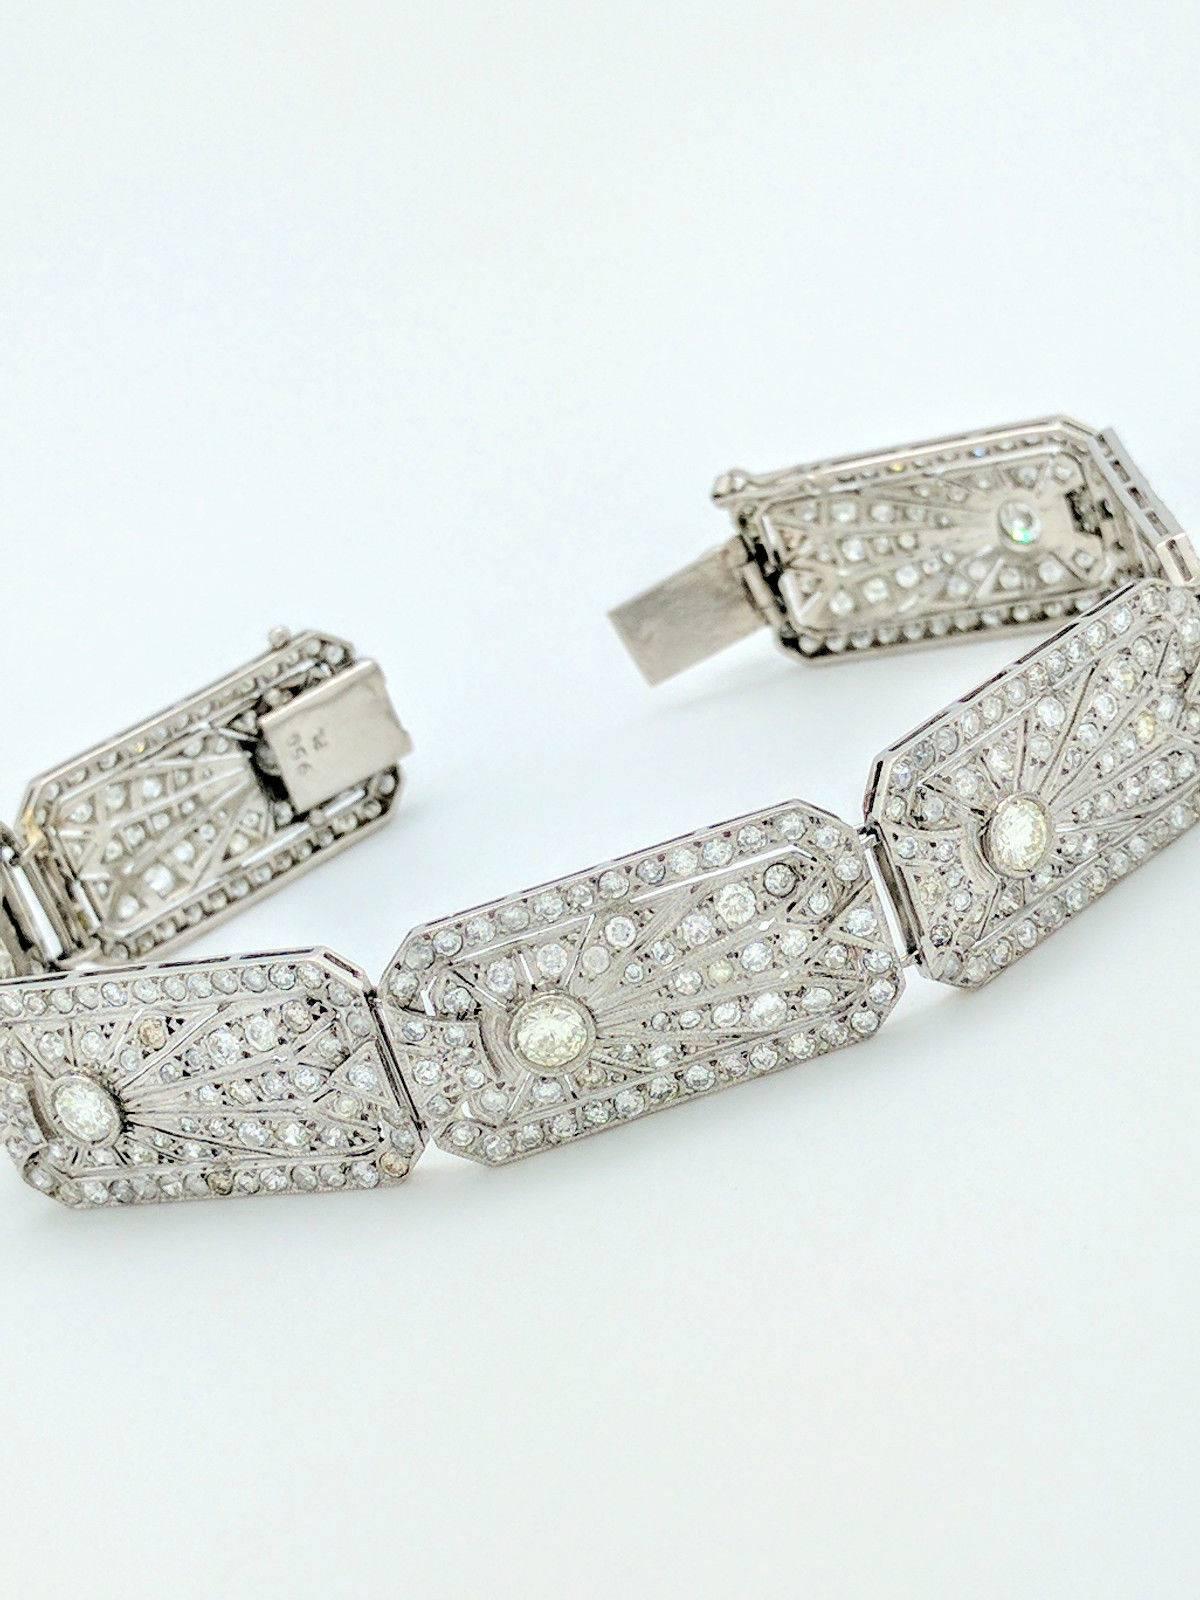 You are viewing a gorgeous 1930's Art Deco platinum bracelet. If you love the look of real vintage jewelry, this is the perfect piece for you!

This bracelet is crafted from platinum, weighs 29.7 grams and measures 14mm in width. There are 7 links